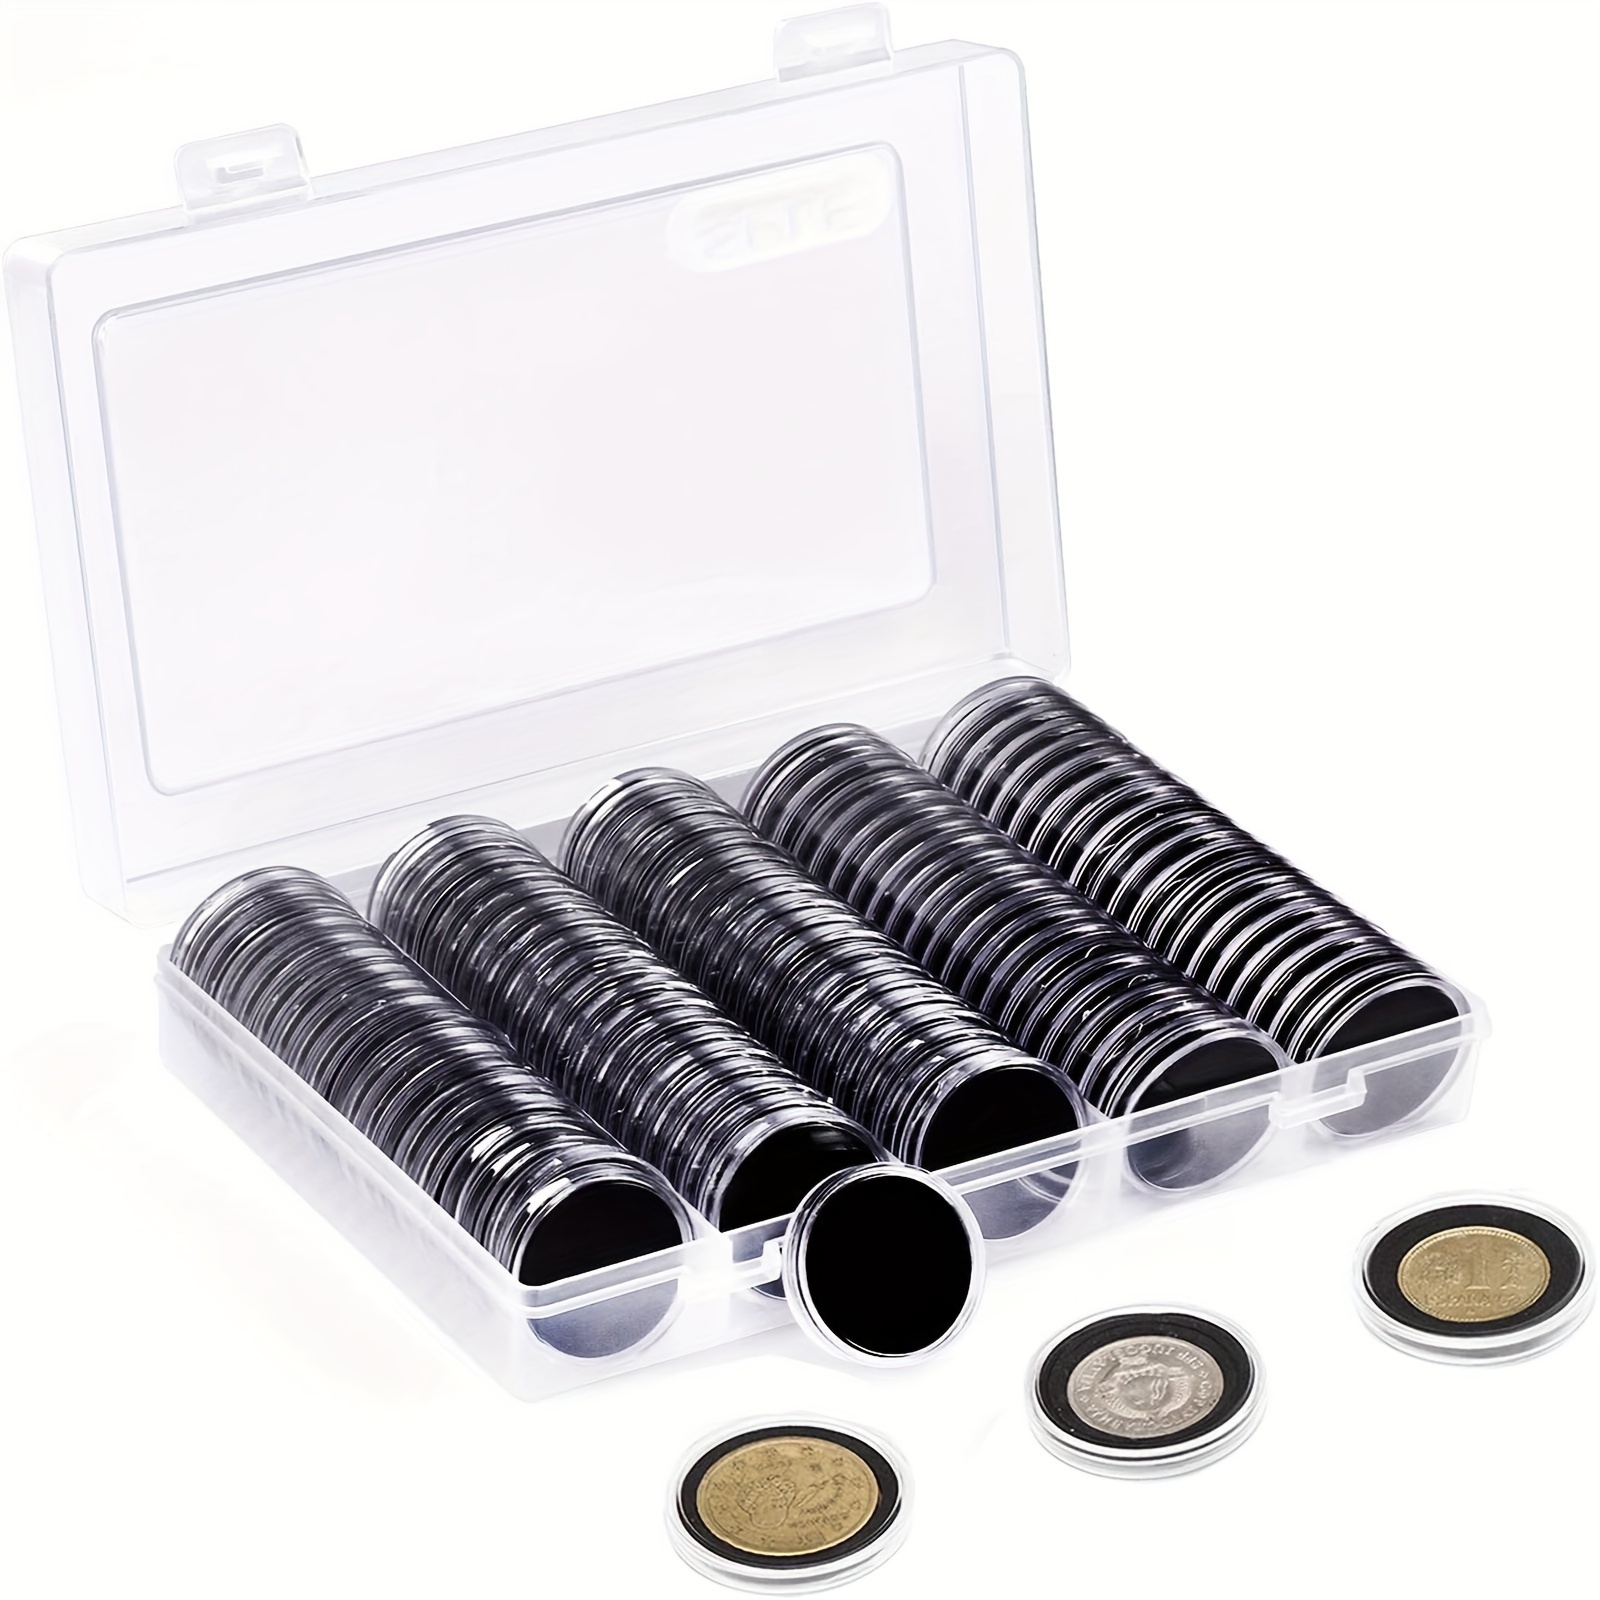 

101pcs Black Inner Cushion, 5 Sizes Of Commemorative Coin Protection Box, Coin Collection And Storage Box